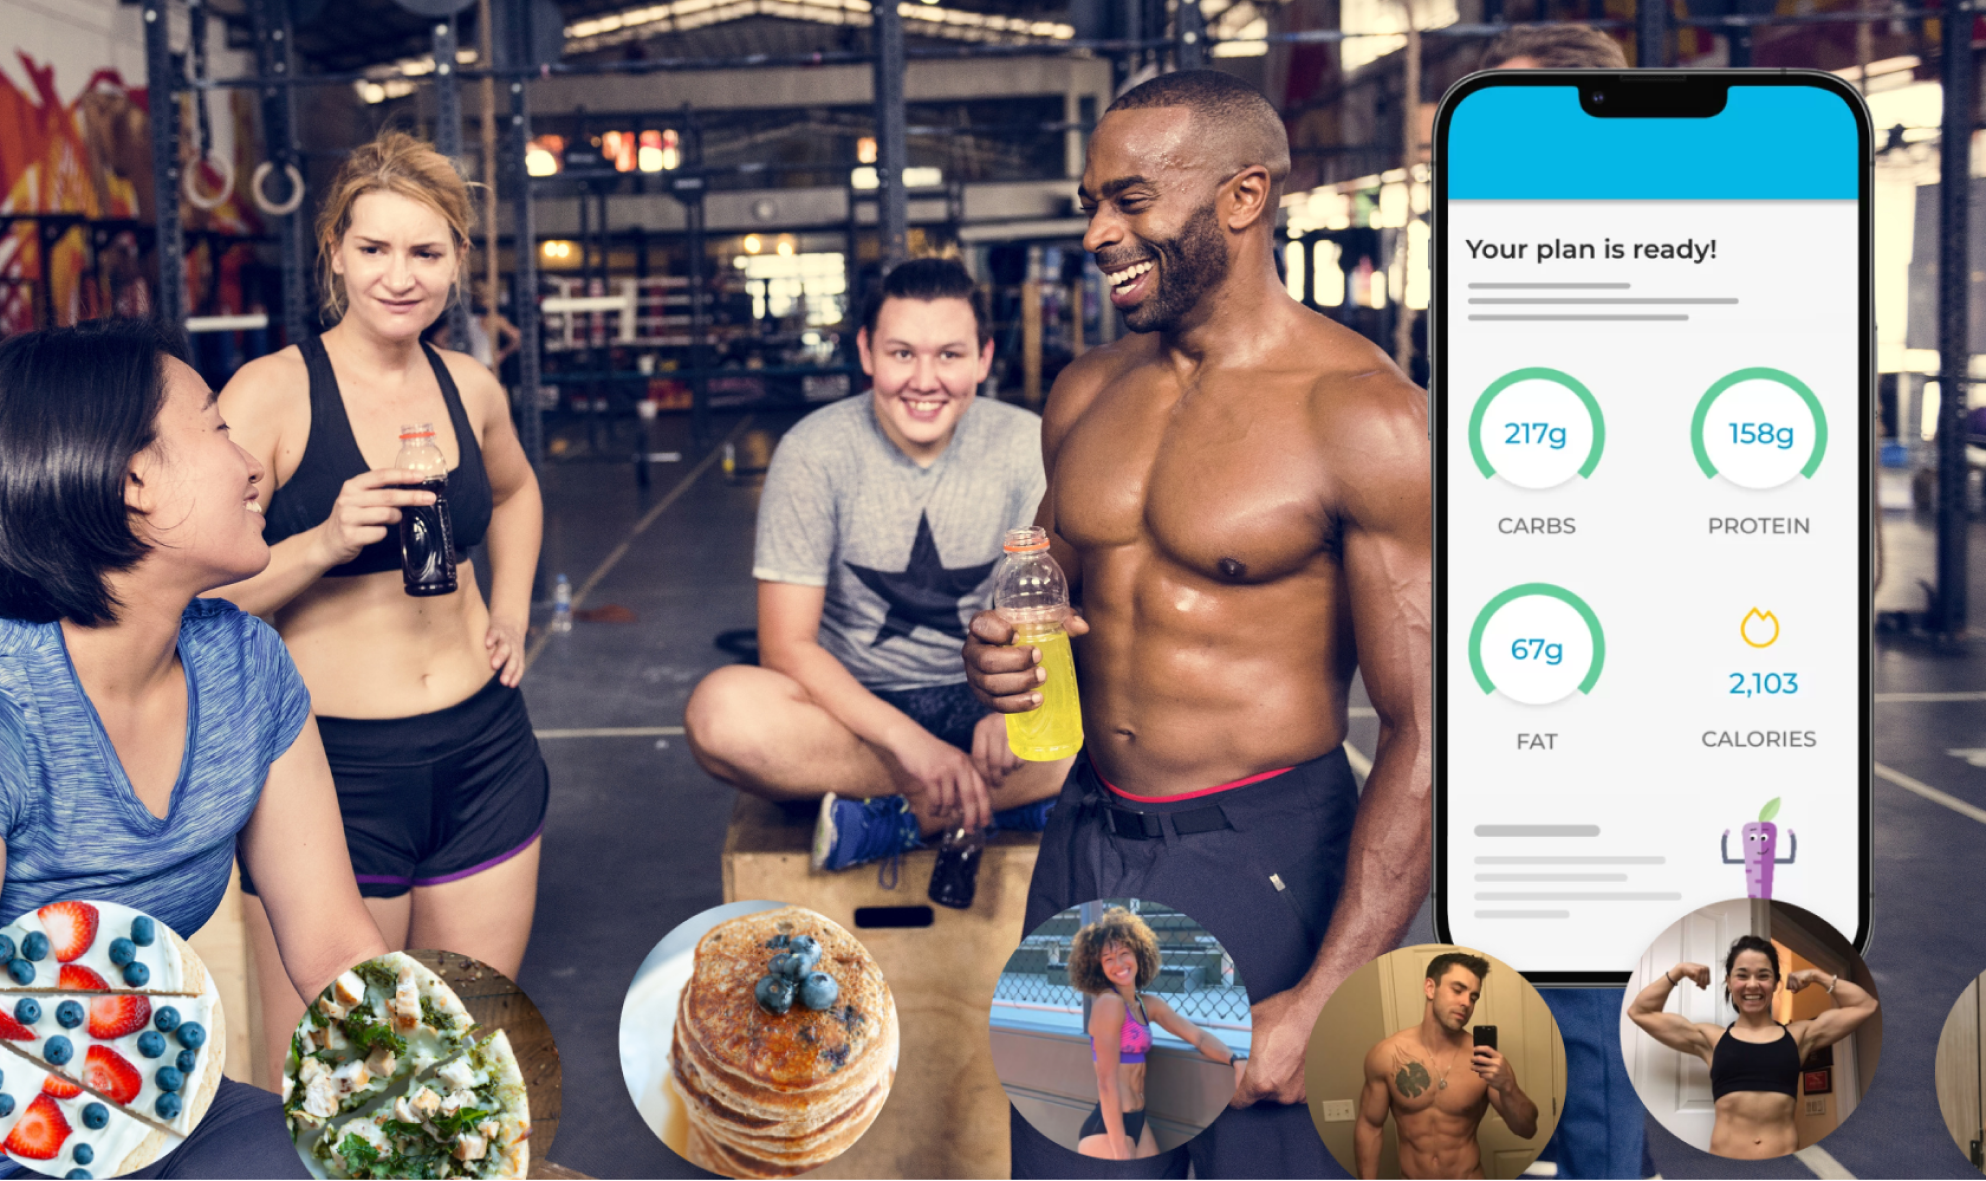 Your clients get a custom nutrition plan, a food tracker, and recipes directly through our mobile app.